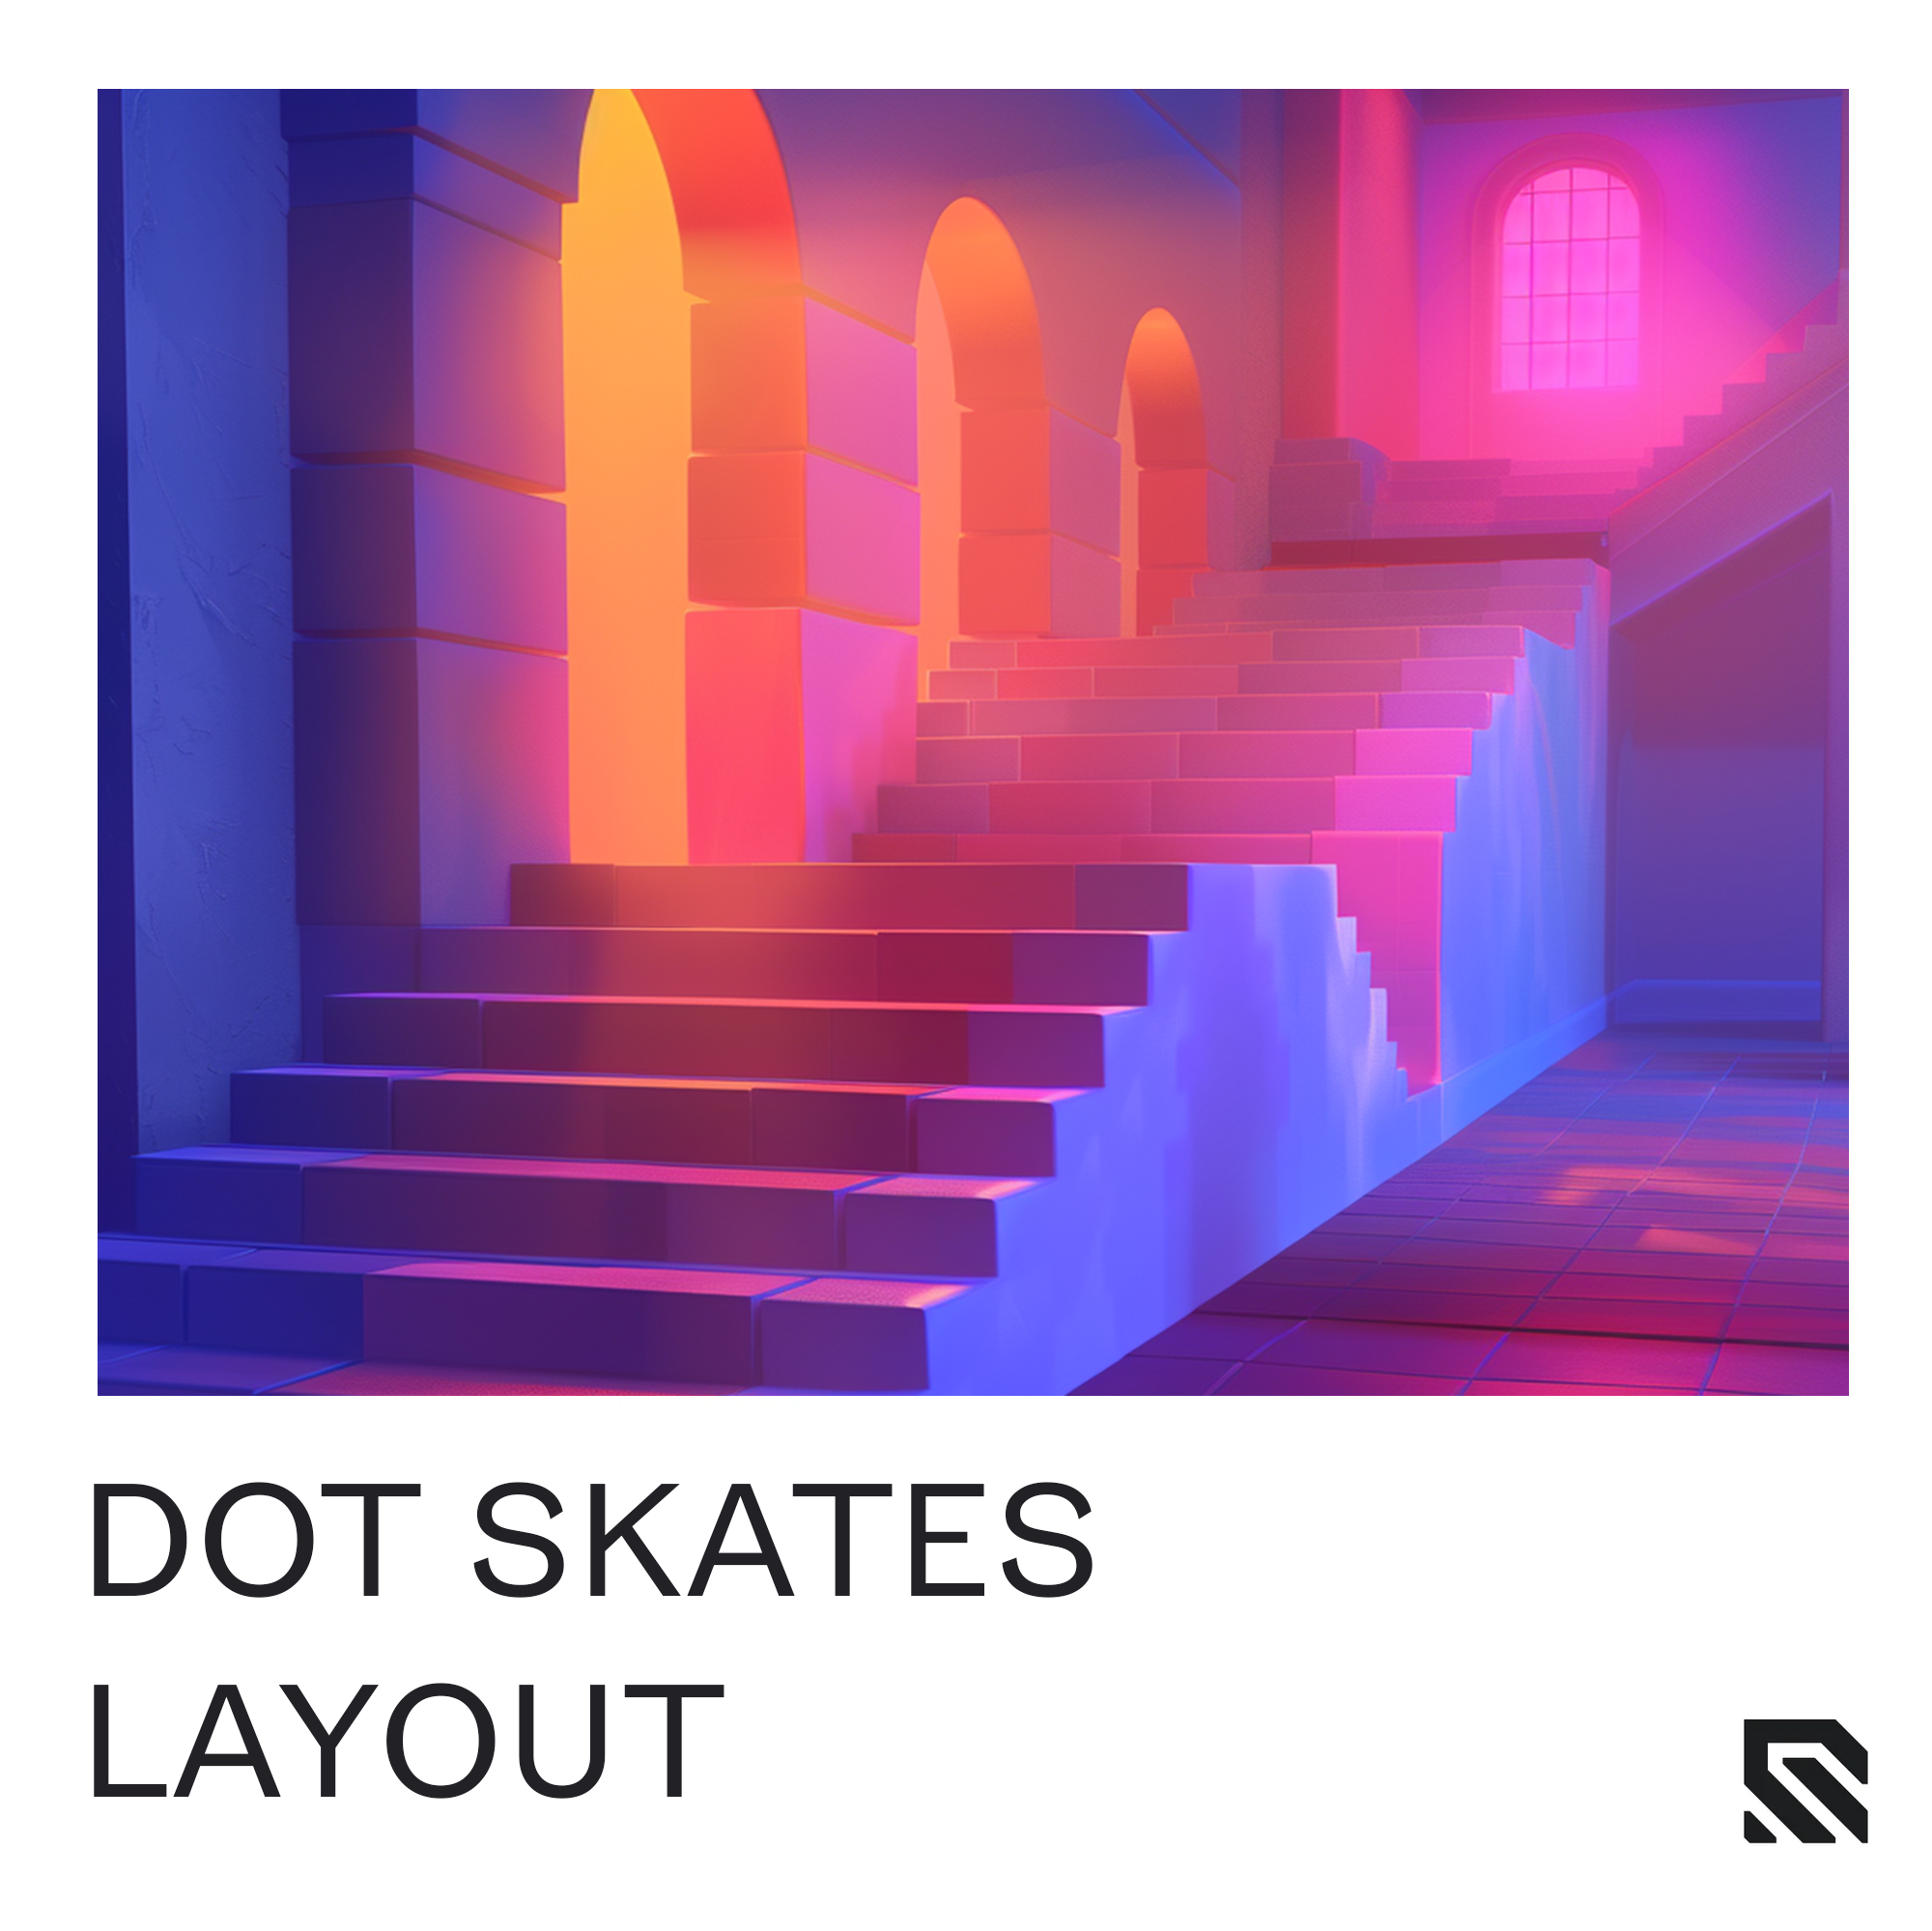 dot skates layout wallhack difficult easy understanding neon staircase in a castle